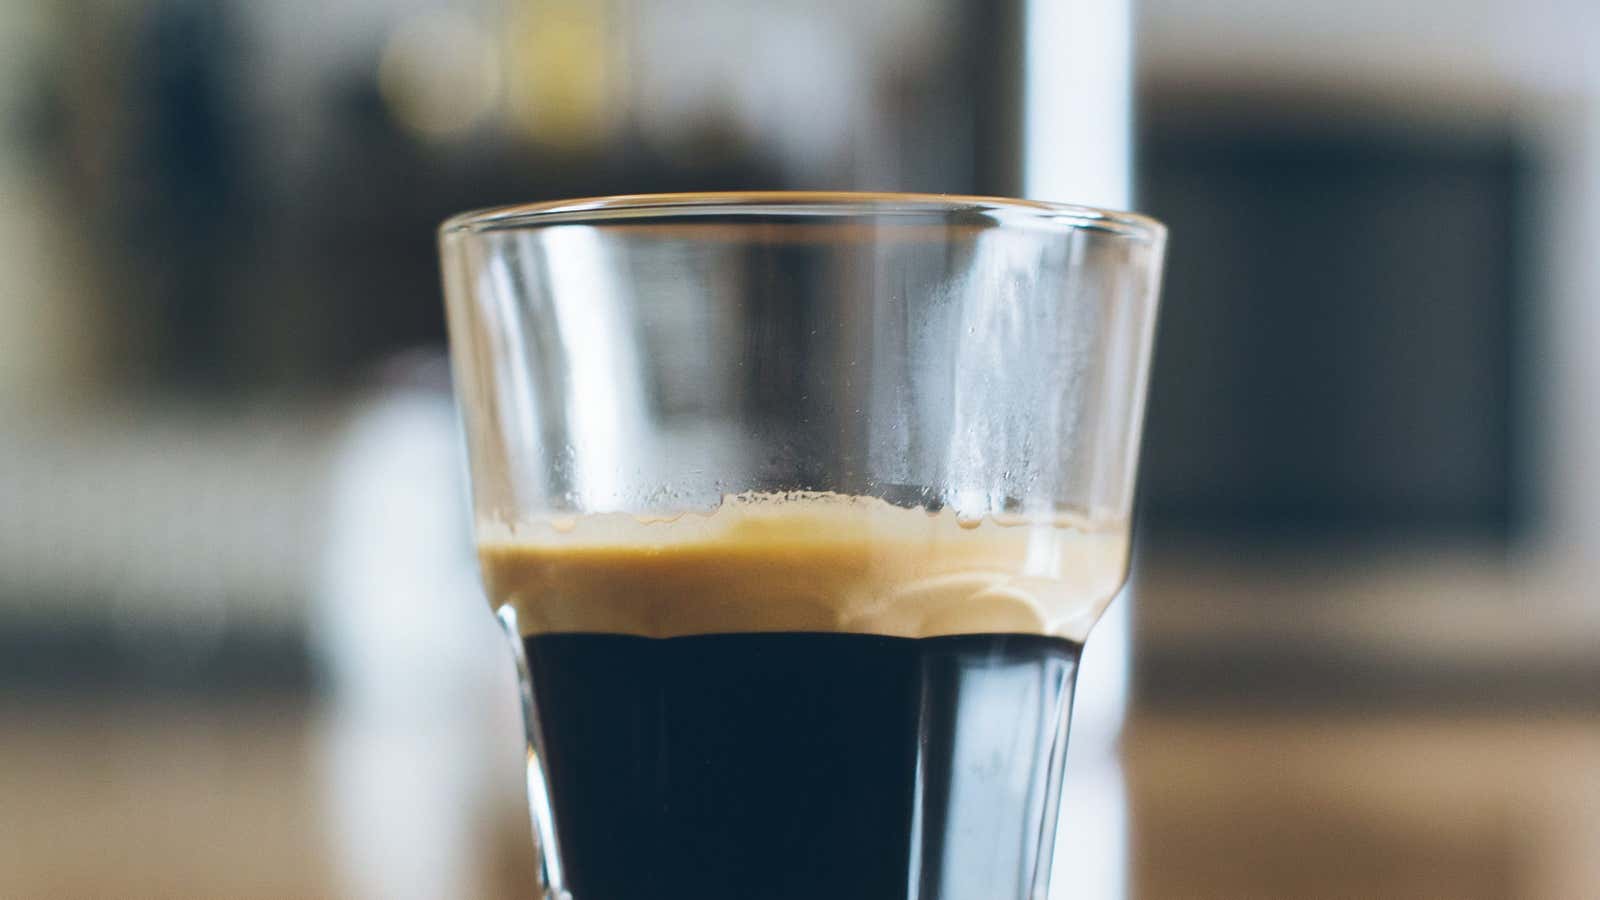 Nitrogen gives beers like Guinness a creamy, smooth foam.